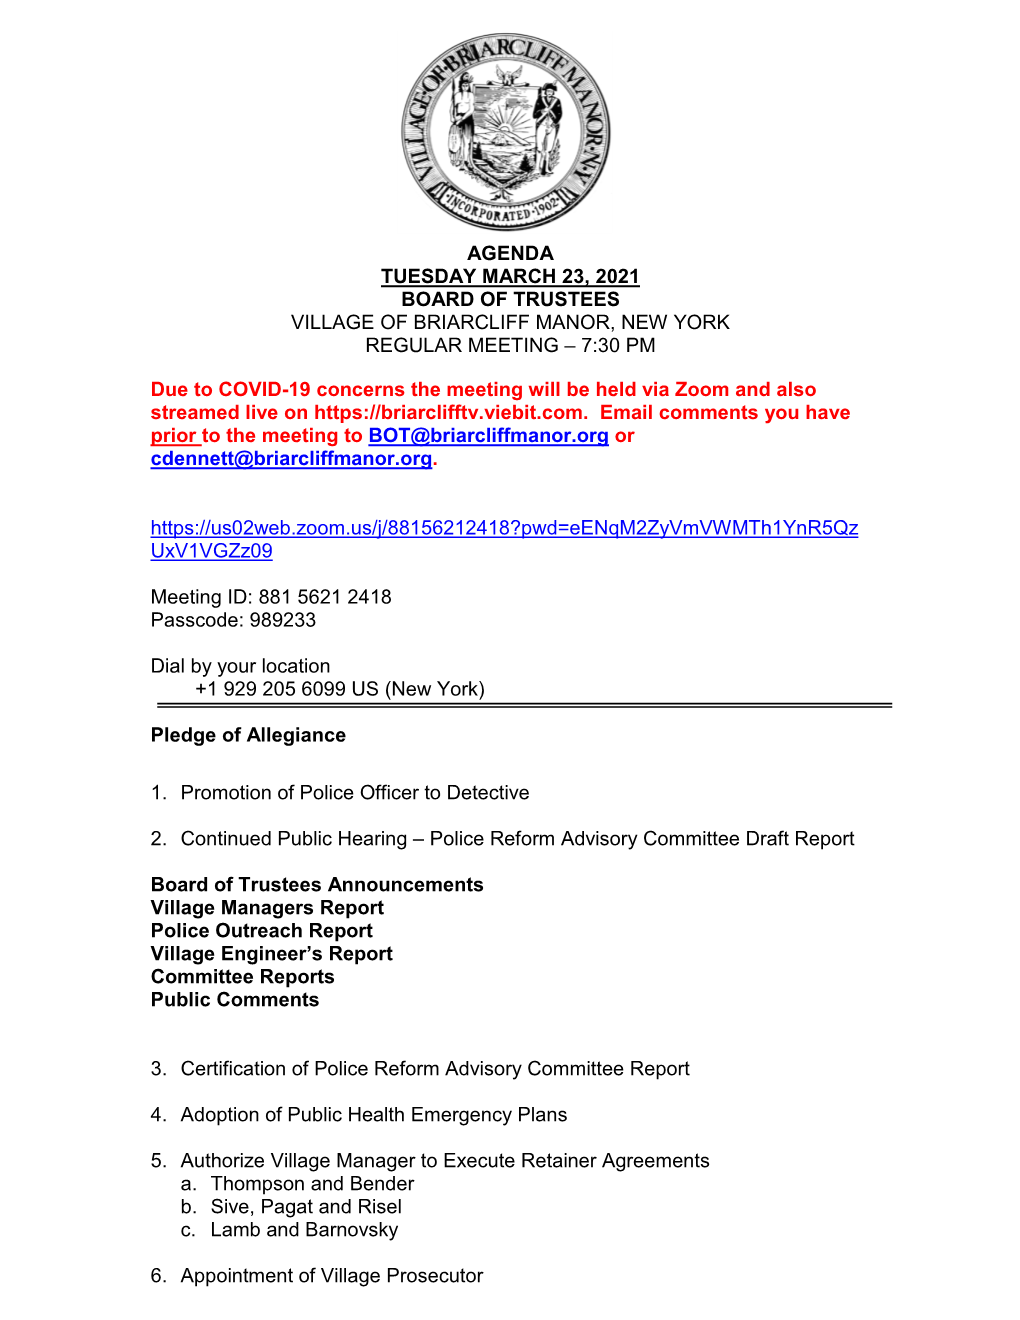 Agenda Tuesday March 23, 2021 Board of Trustees Village of Briarcliff Manor, New York Regular Meeting – 7:30 Pm